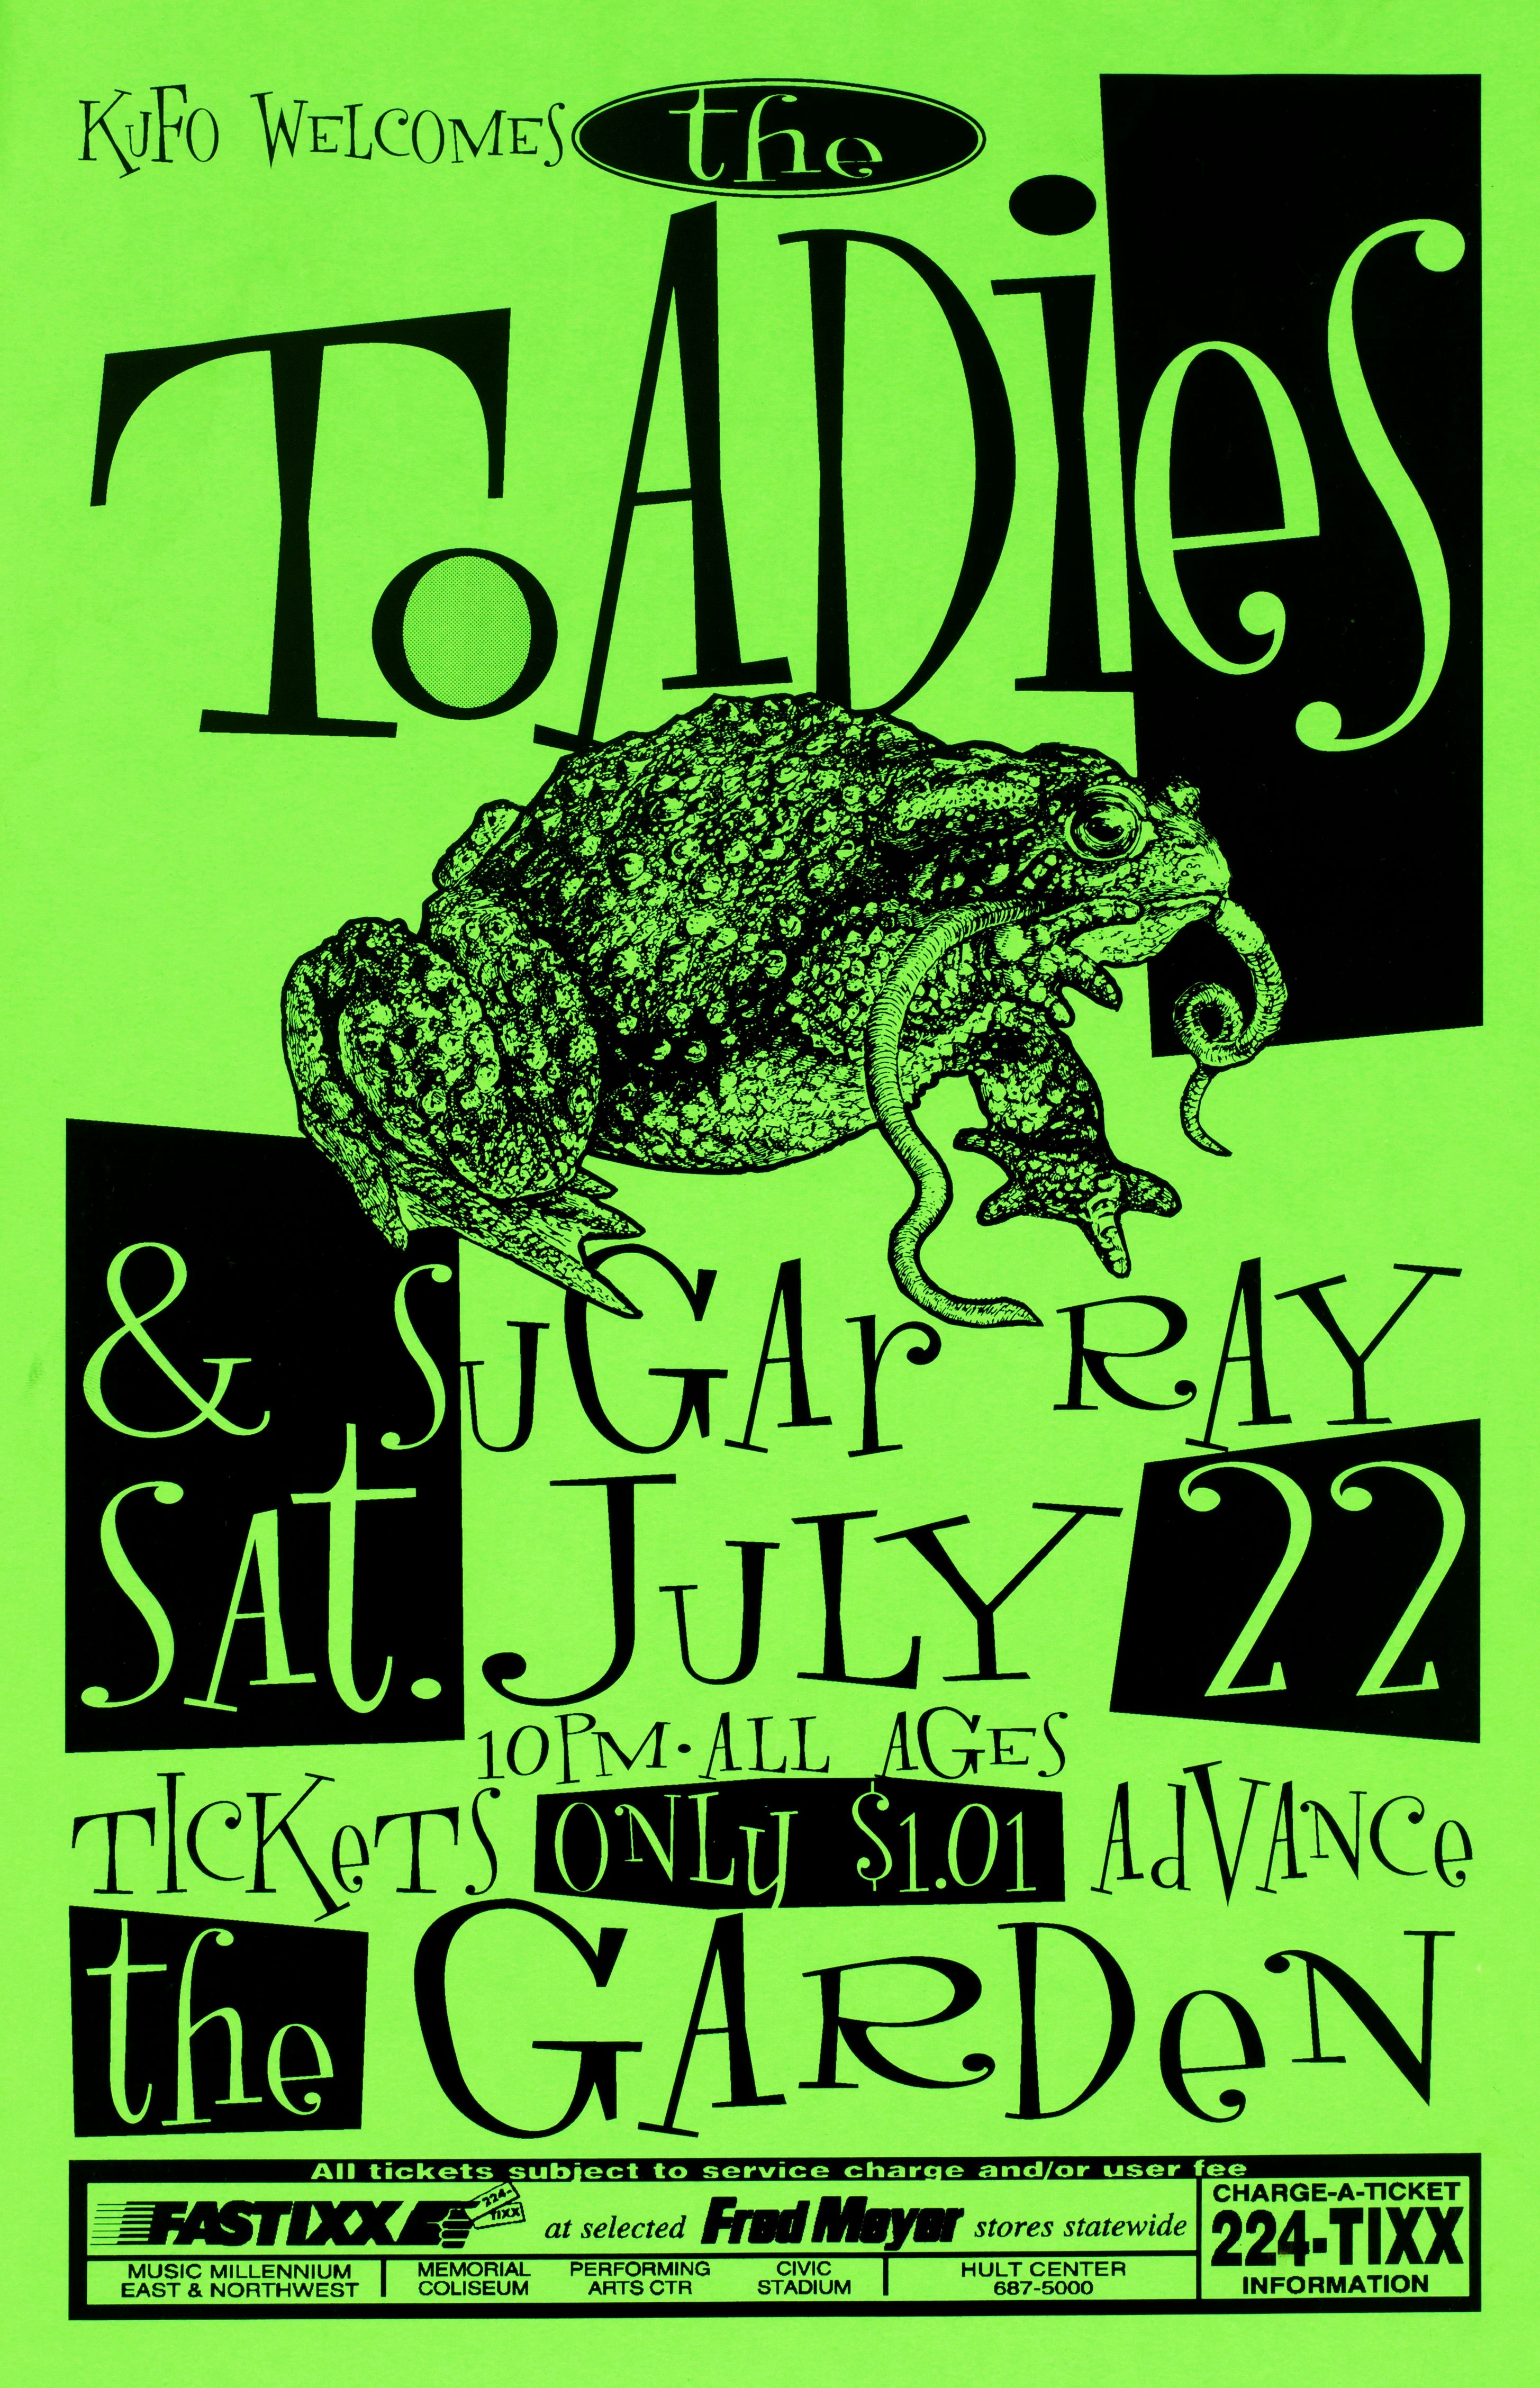 MXP-216.2 The Toadies & Sugar Ray The Garden 1995 Concert Poster